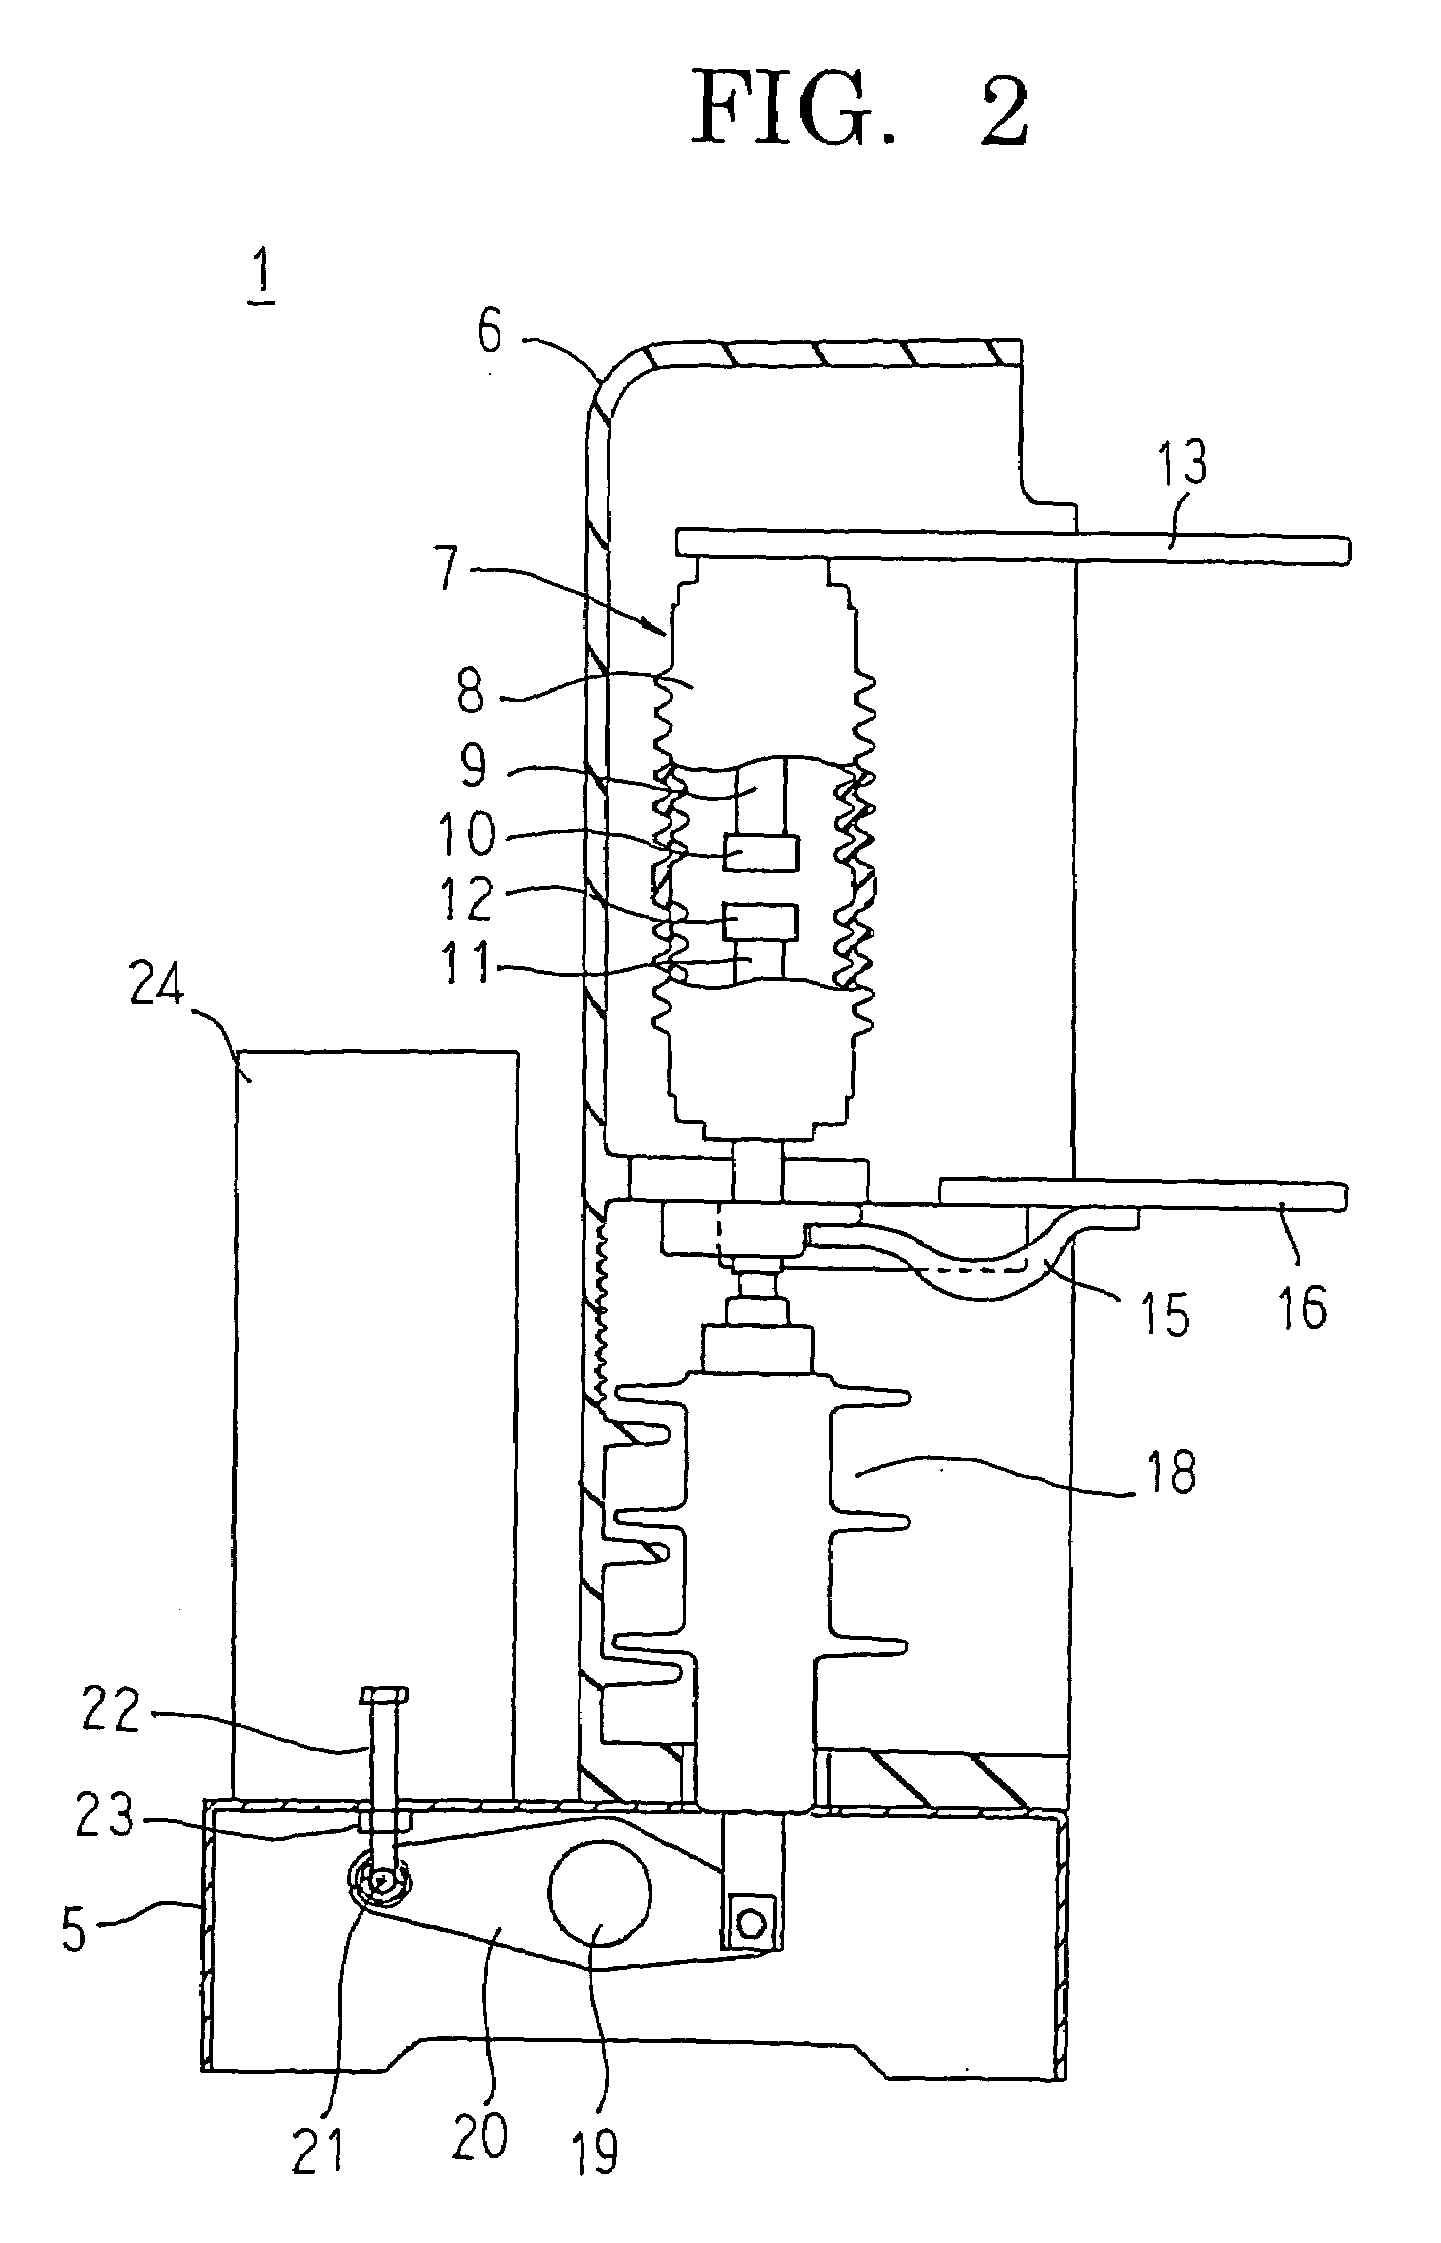 Vacuum circuit breaker, vacuum circuit breaker contact slow closing method, and contact erosion measuring method and contact gap length setting method using that slow closing method